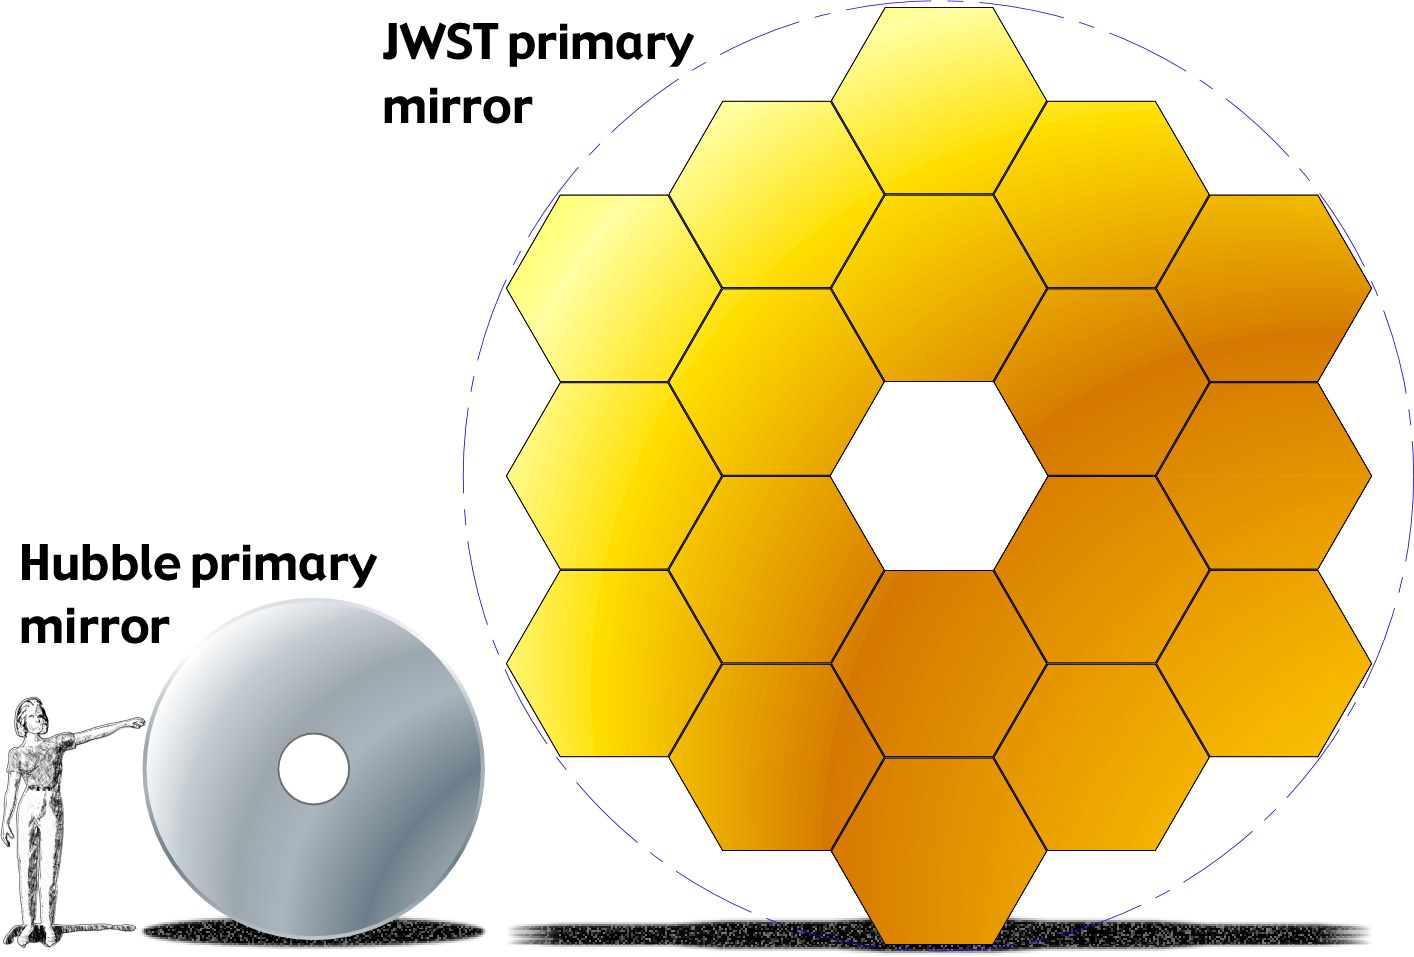 JWST HST primary mirrors - What is the James Webb Space Telescope?